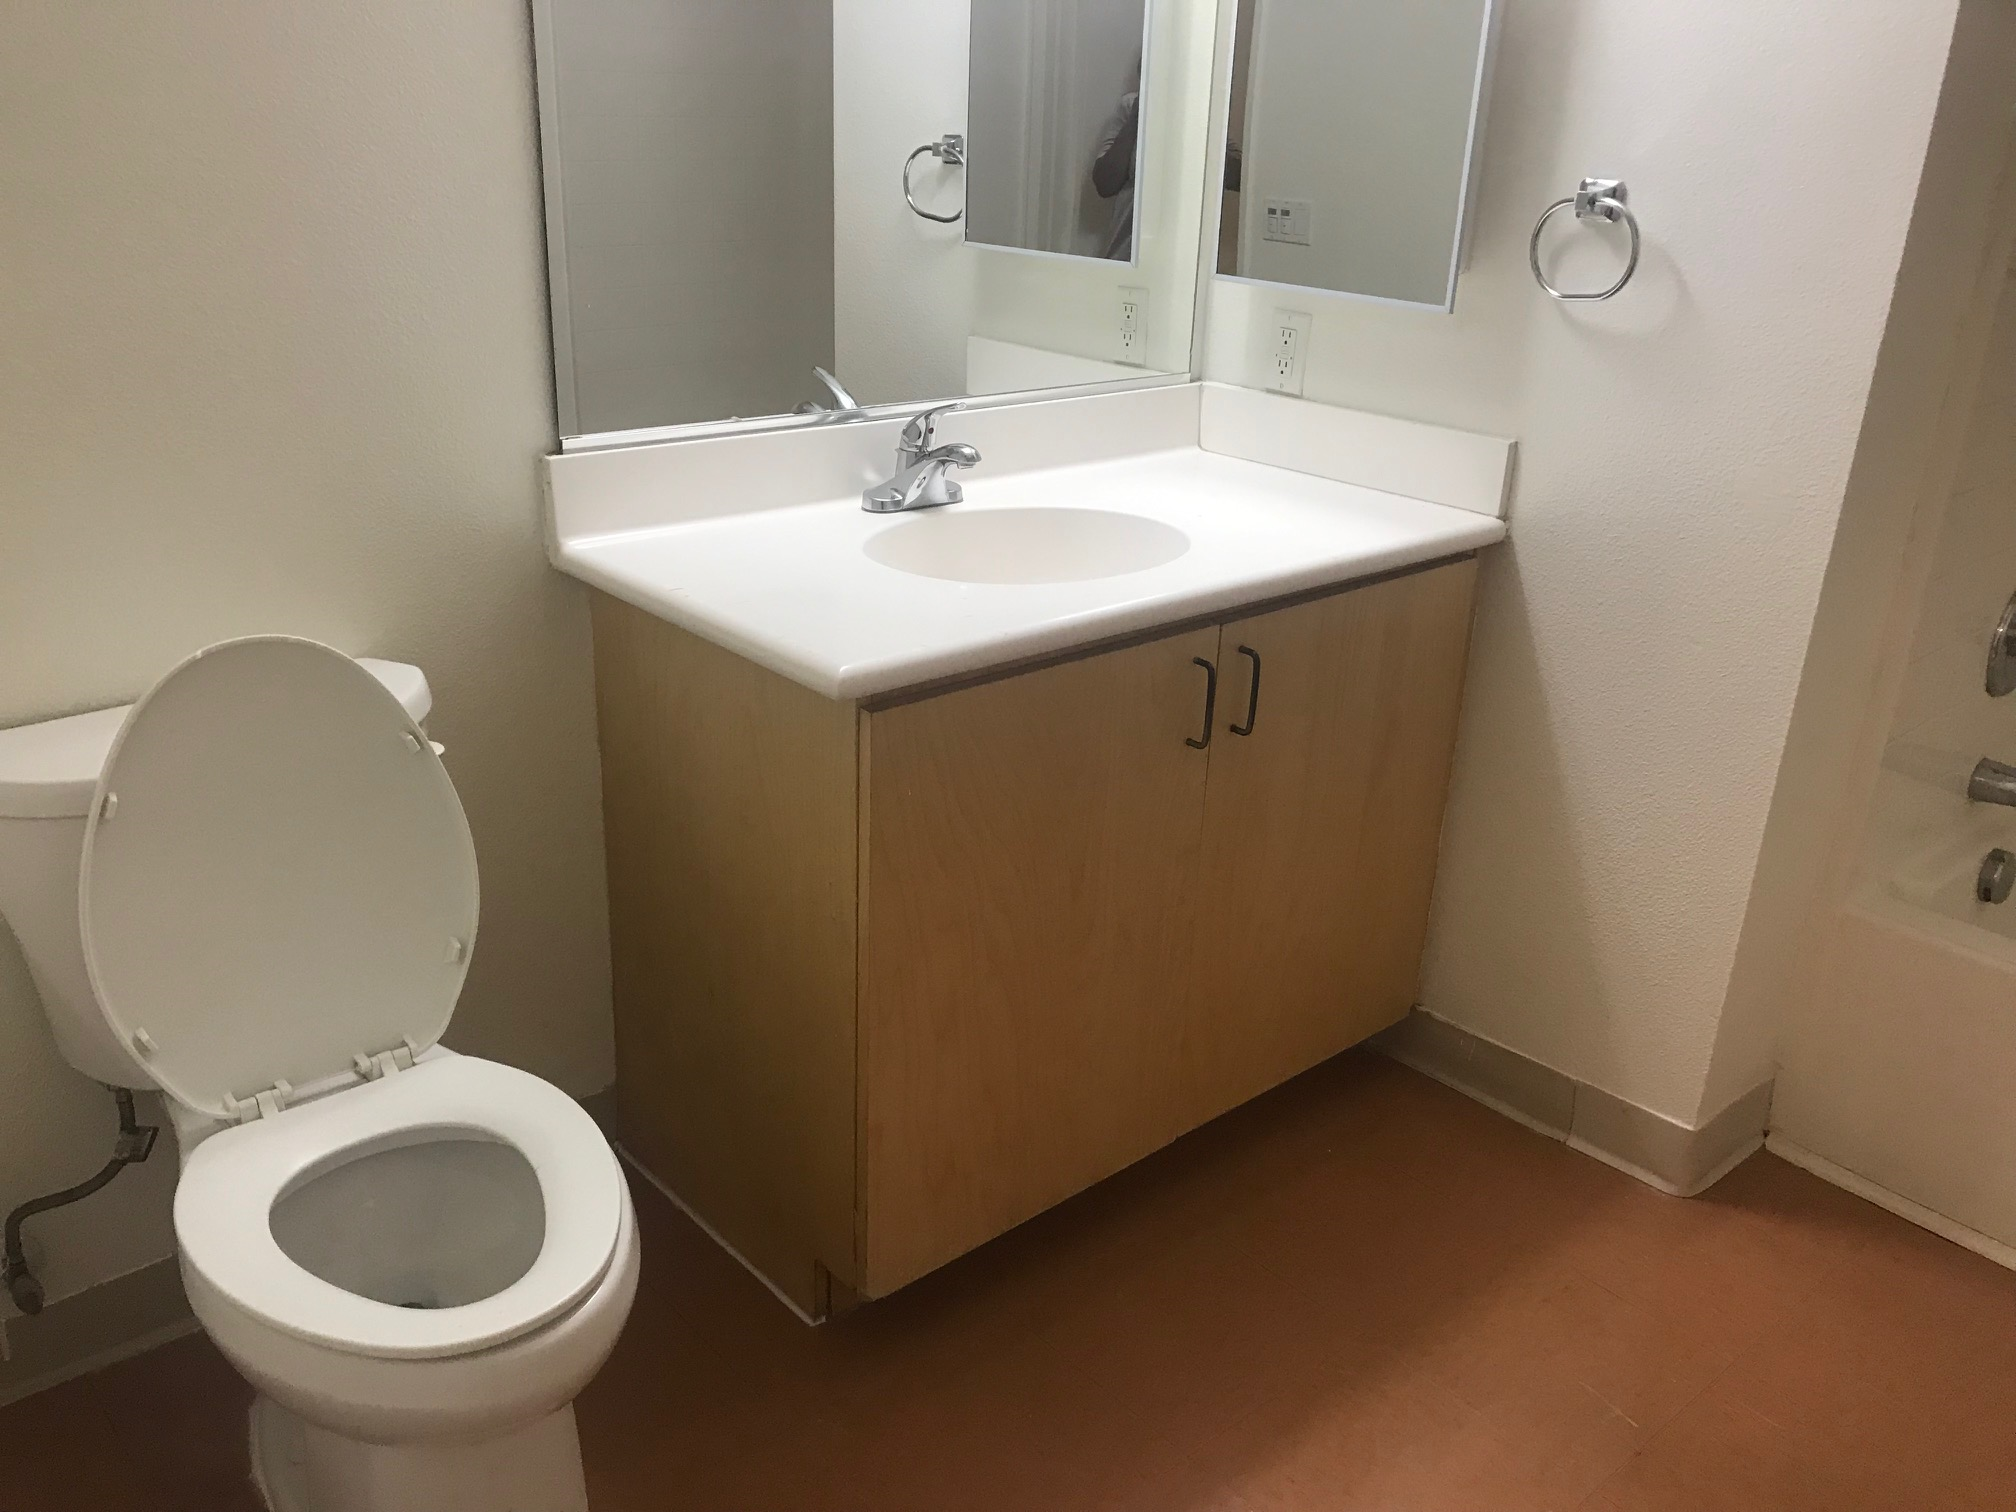 Angle view of a restroom with a white toilet, sink, two mirrors, small towel holder and lower cabinets under the sink.